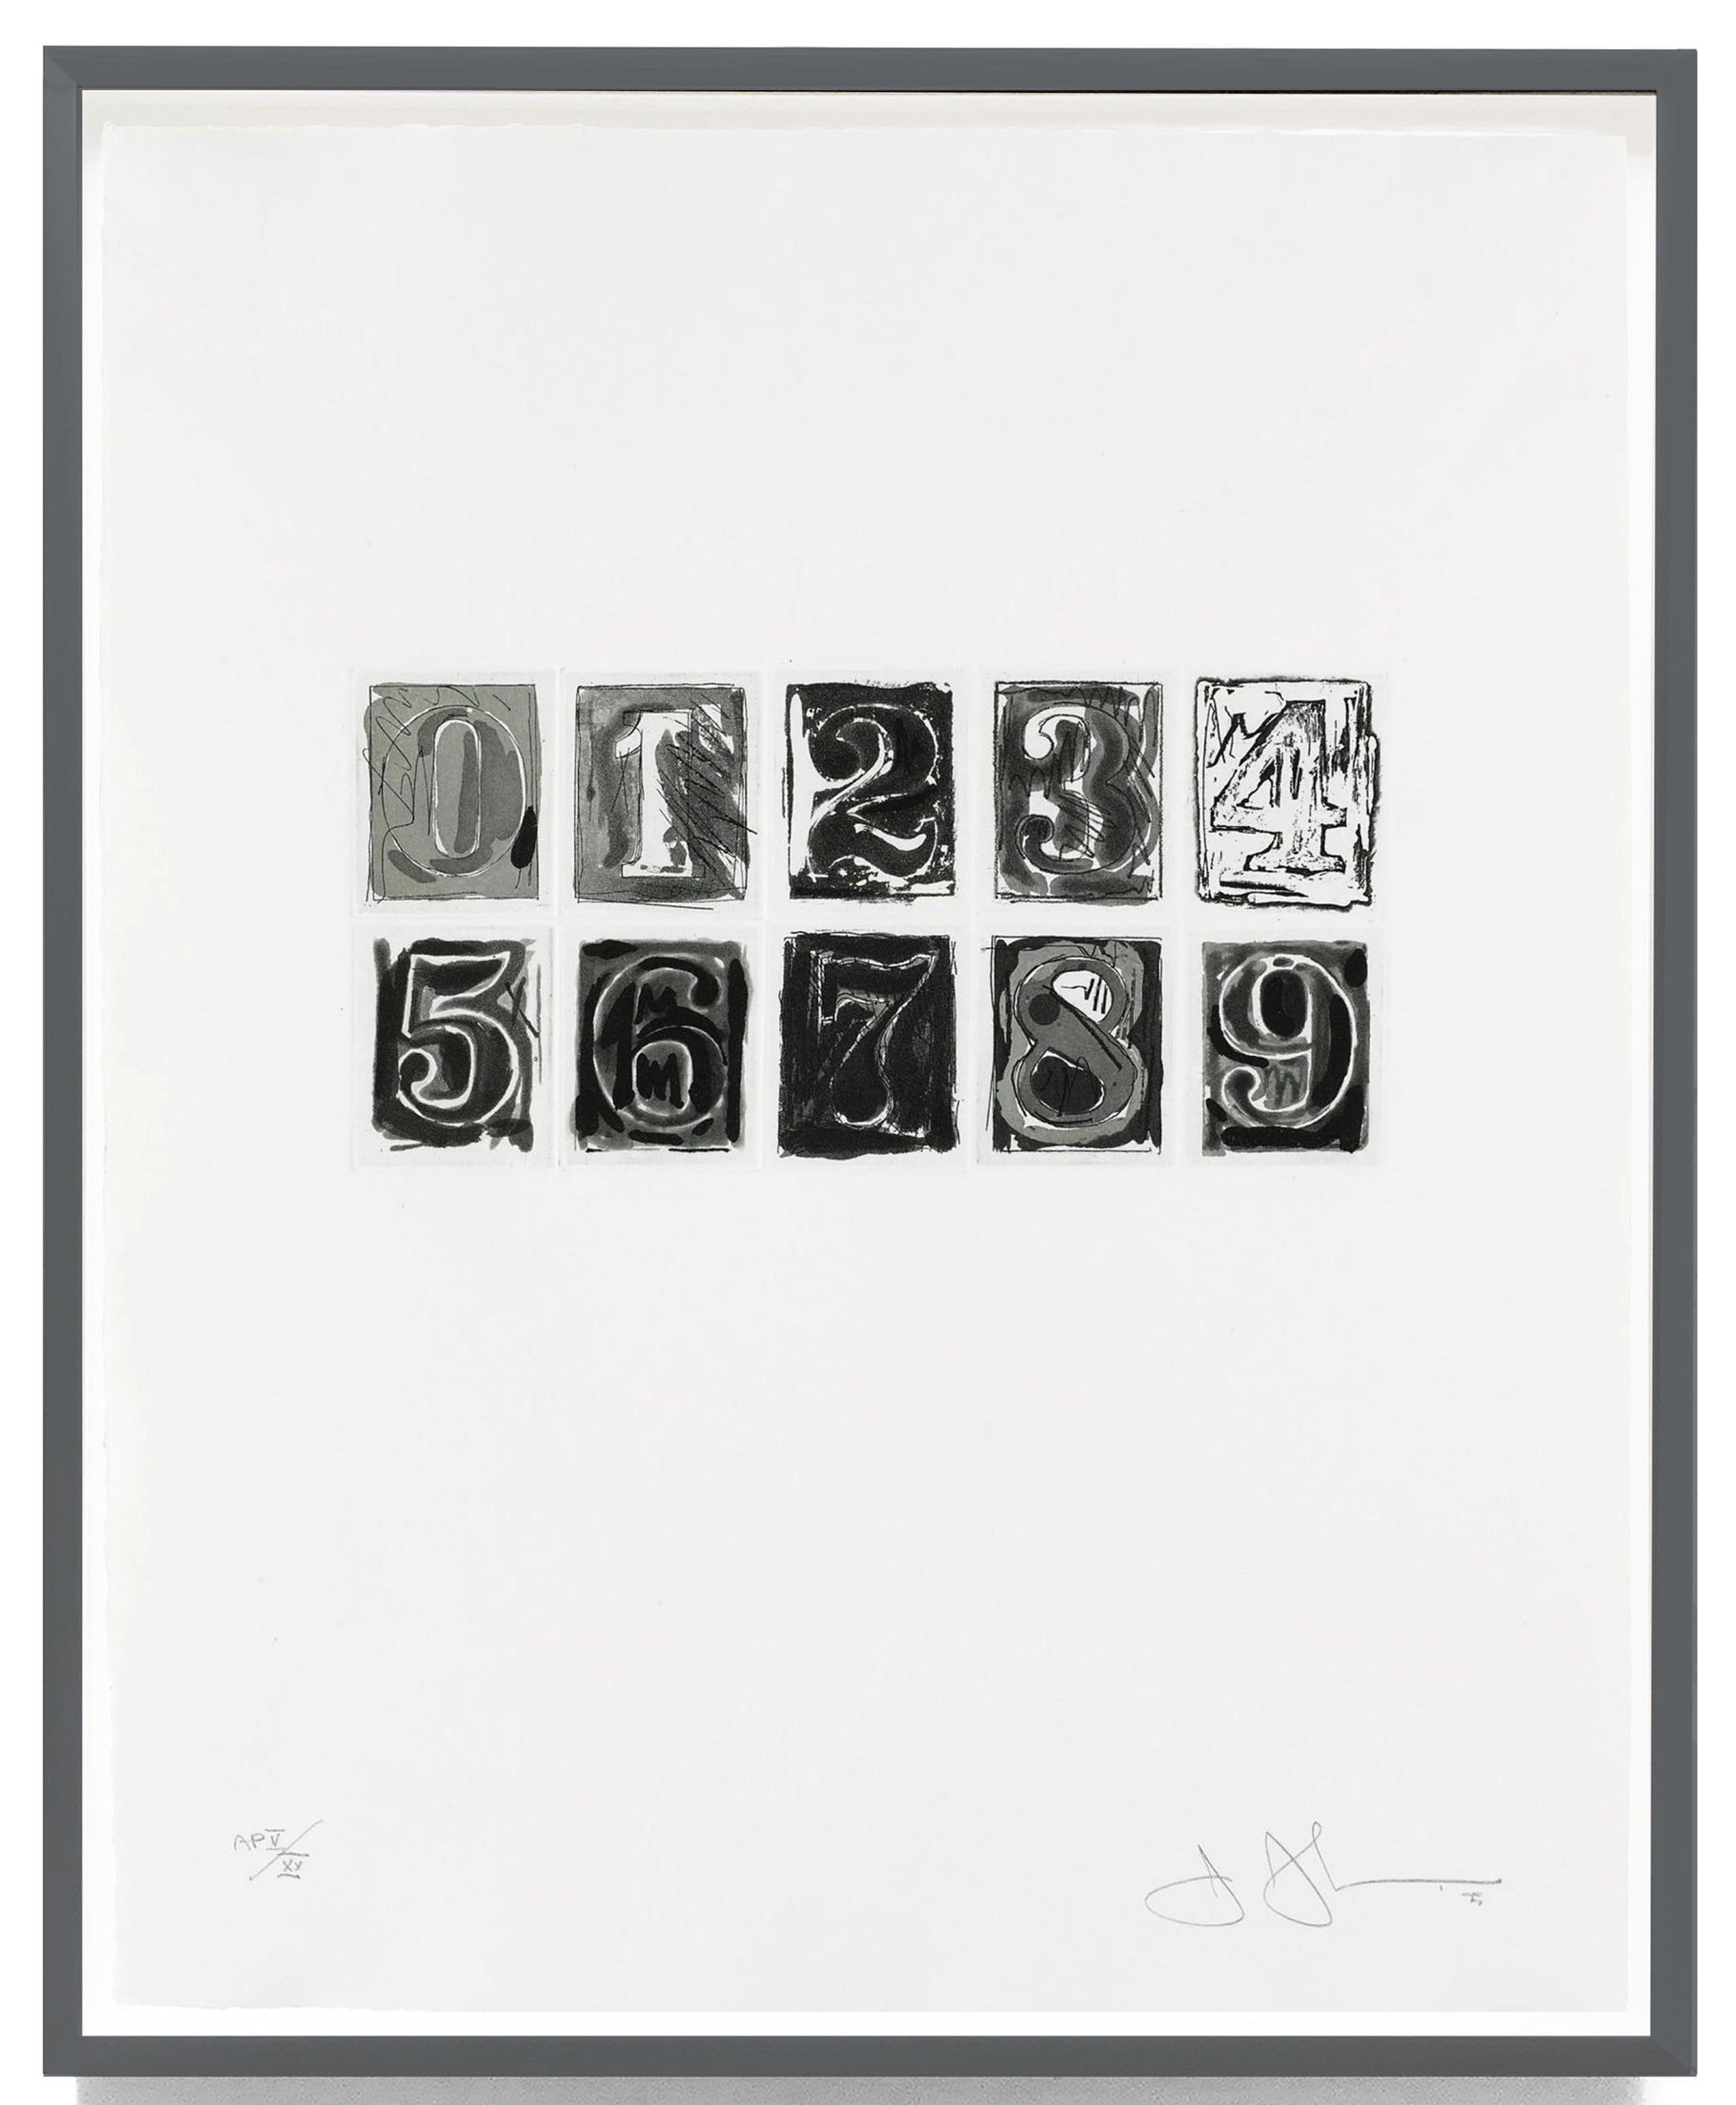 Jasper Johns 0-9 (ULAE 155), 1975 intaglio from 10 copper plates on Barcham Green paper Framed